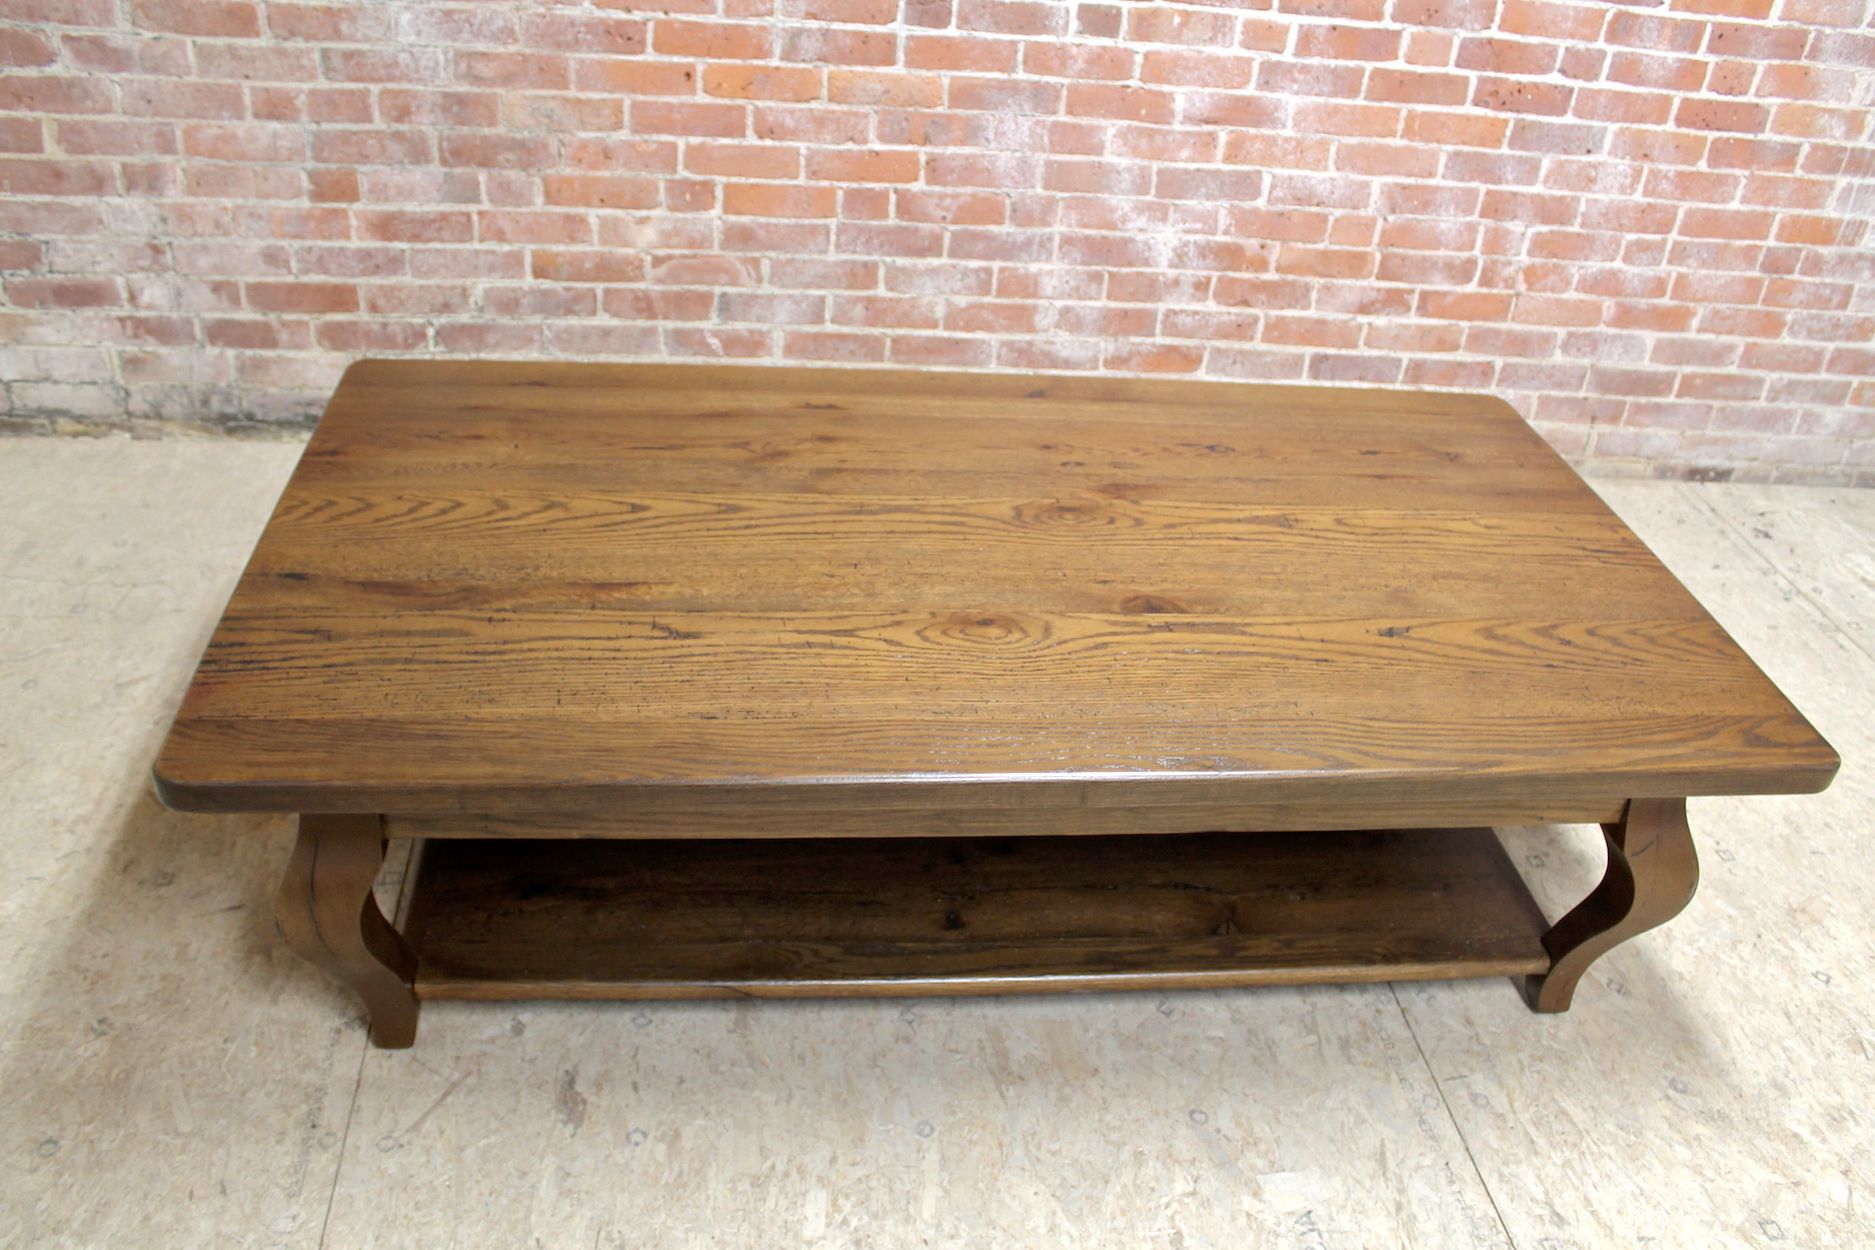 Widely Used Vintage Gray Oak Coffee Tables Intended For 66in Oak Coffee Table In Antique Walnut Finish (View 4 of 20)